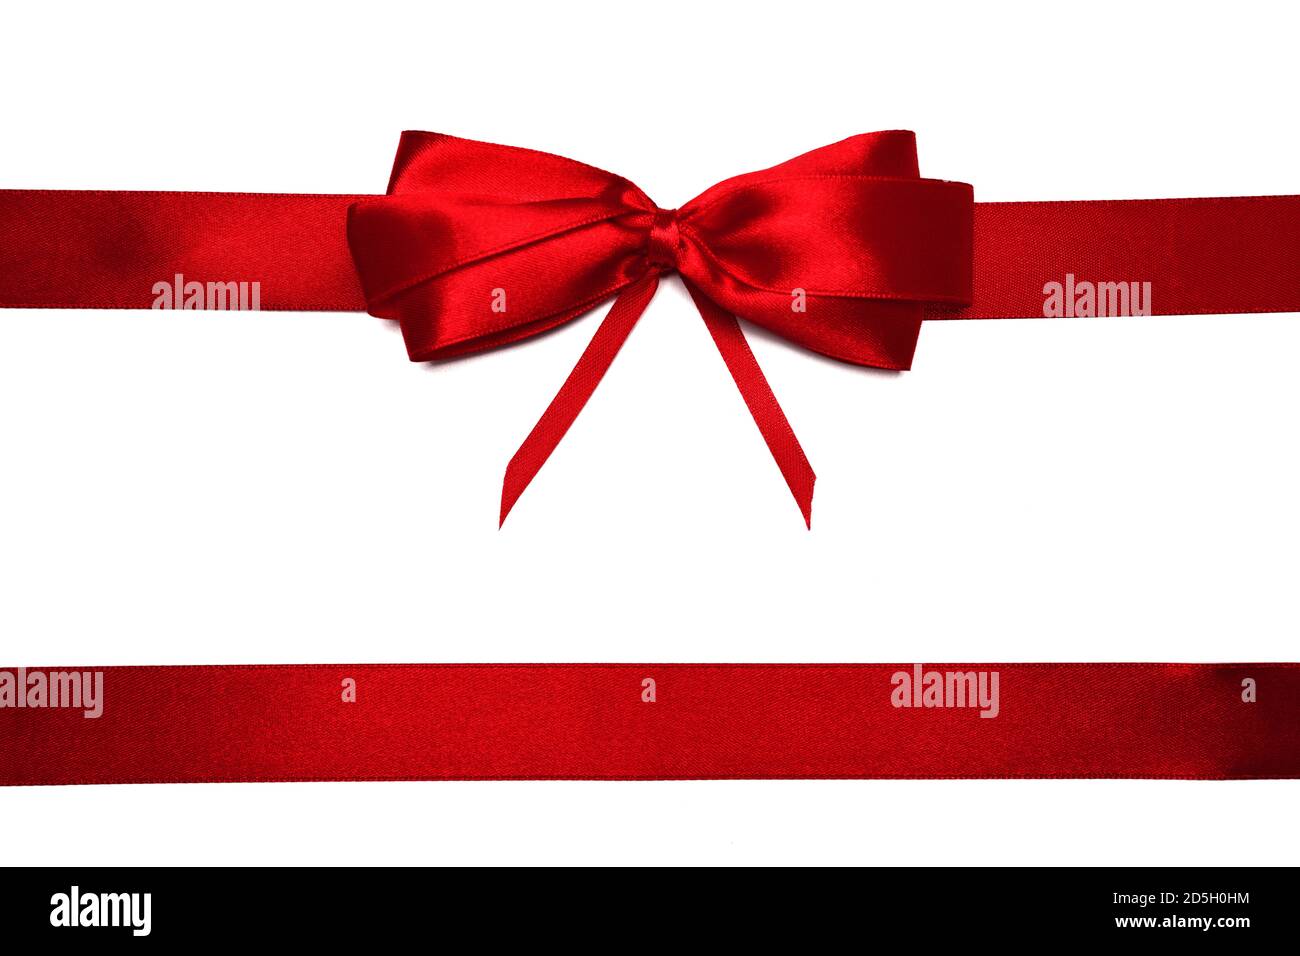 Satin bow with ribbon isolated on white background Stock Photo